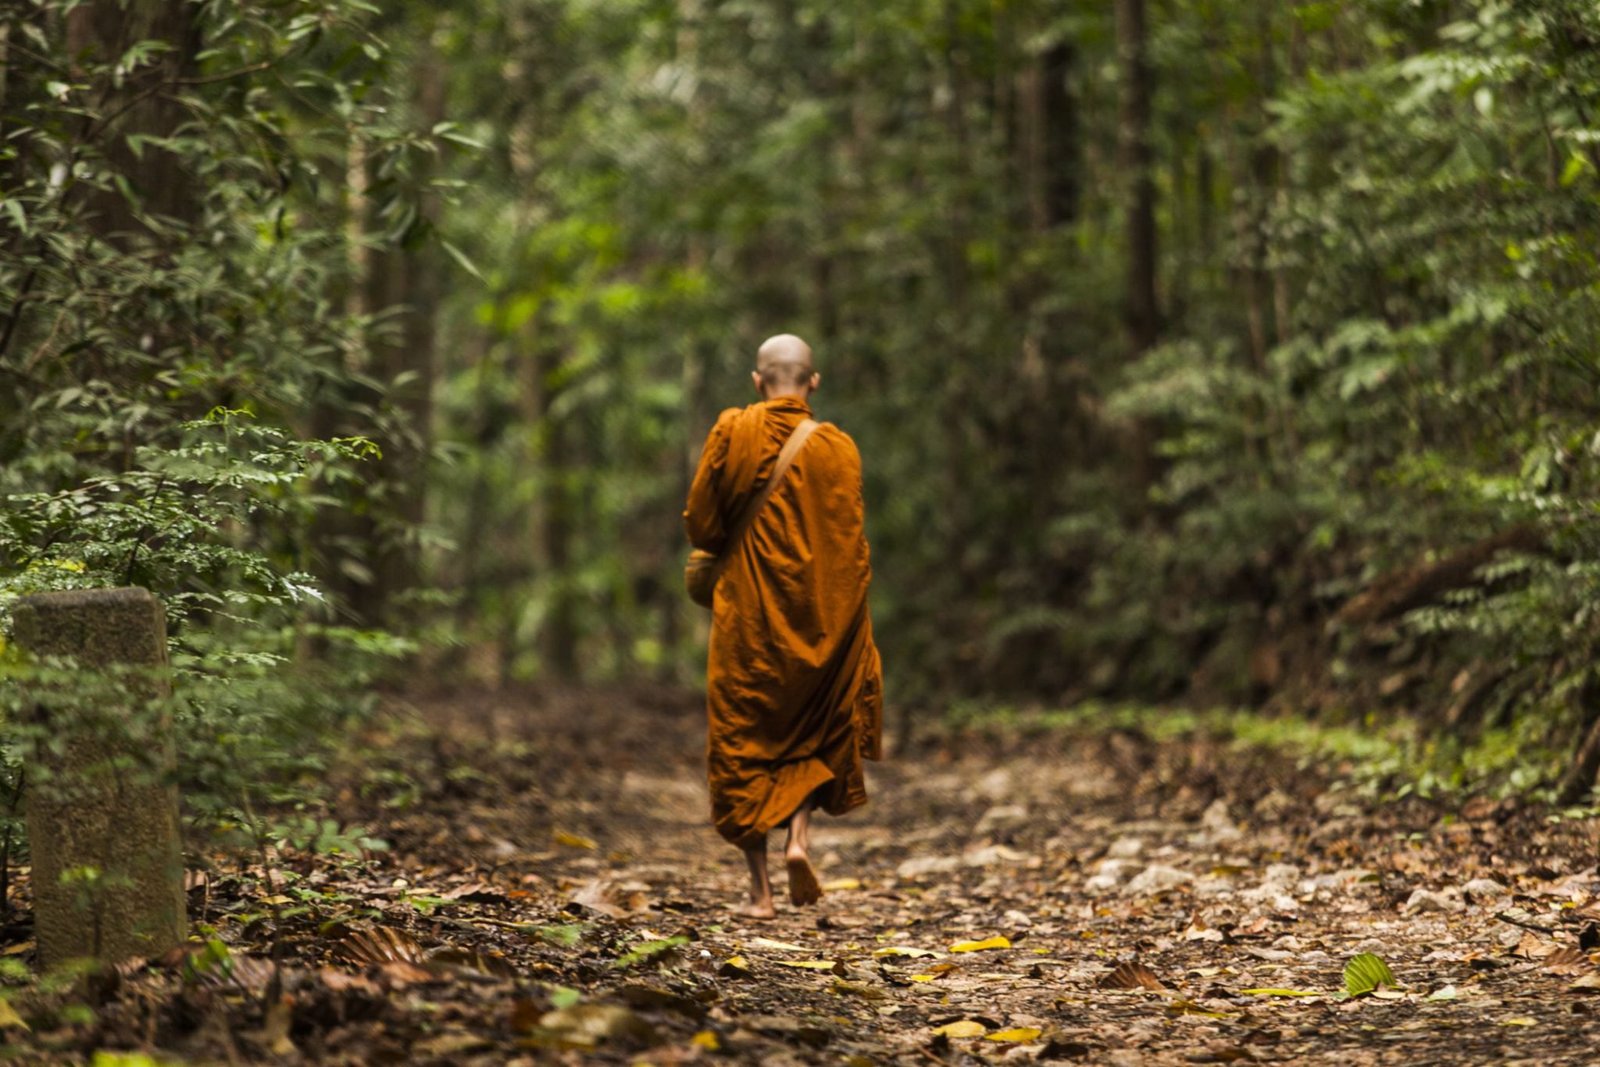 Walking meditation: A new way to battle stressful thoughts